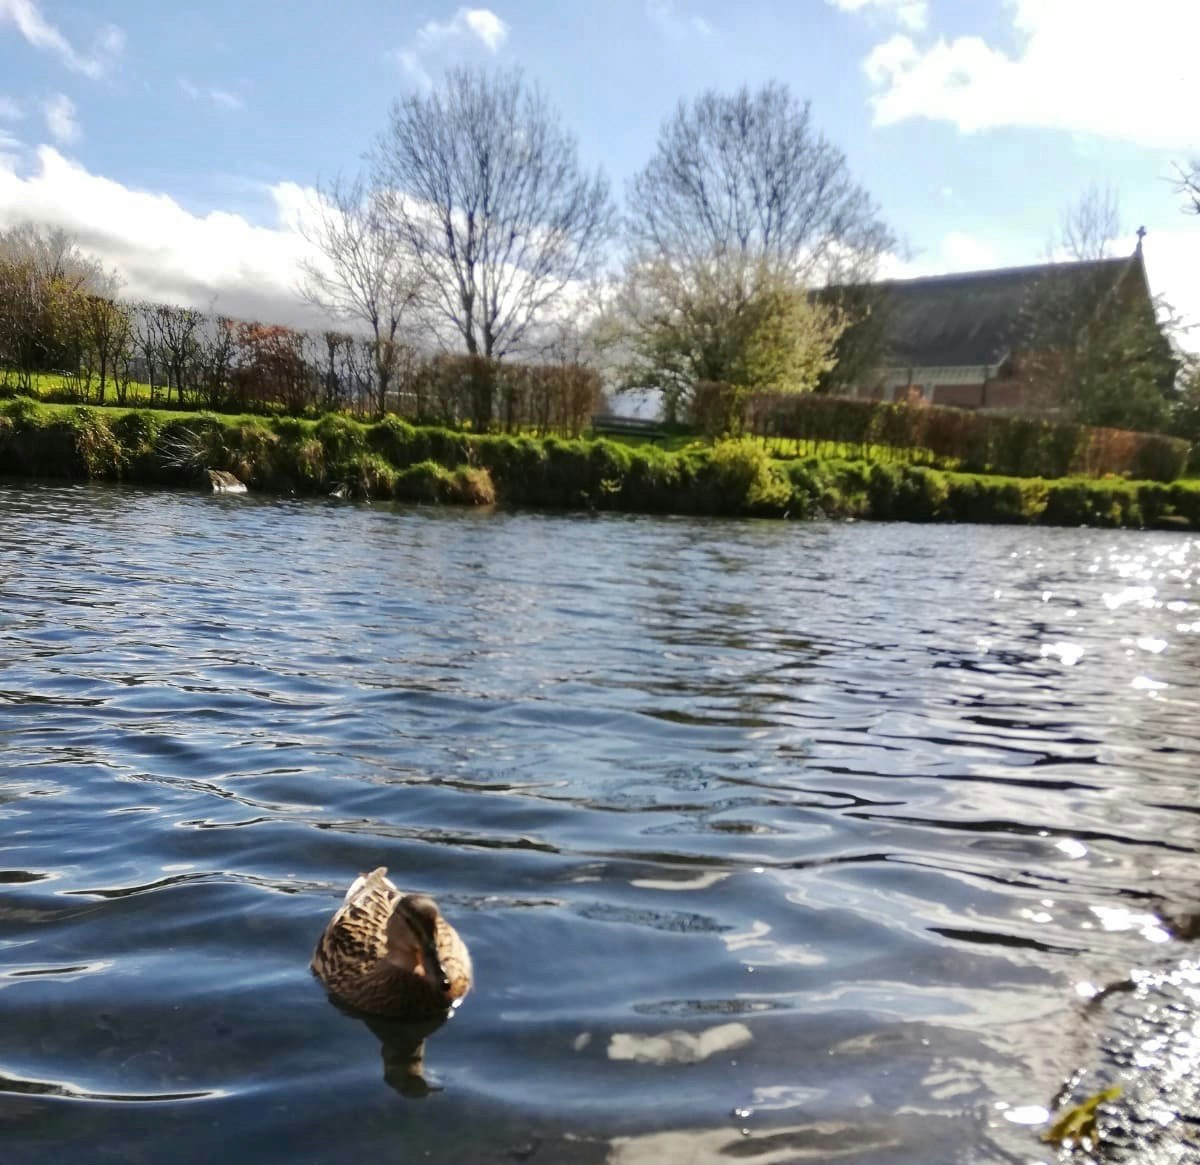 Lakelands in Terenure with a duck in the water